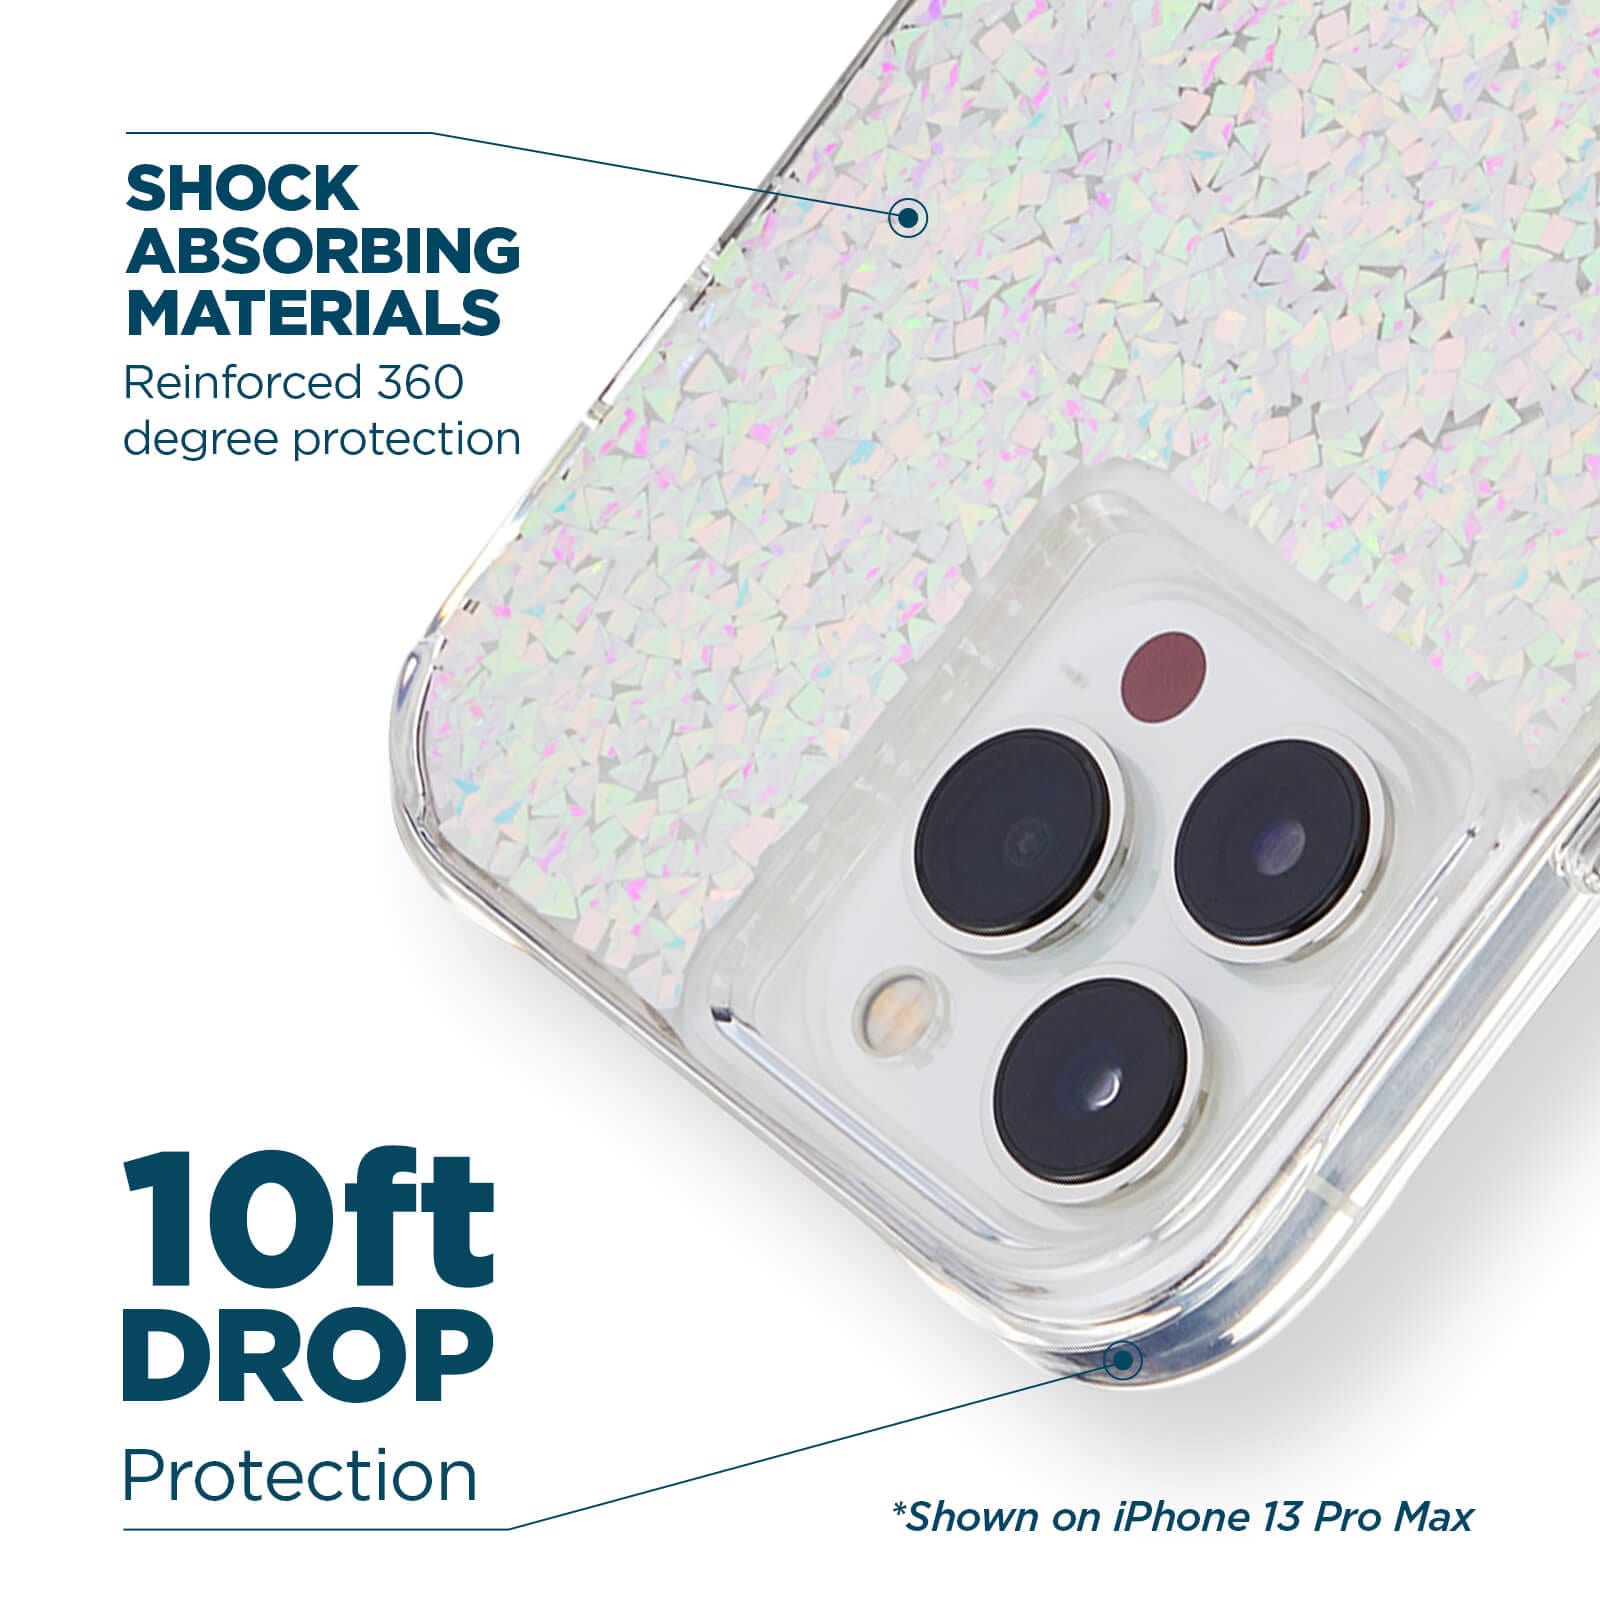 Shock absorbing materials. reinforced 360 degree protection. 10ft drop protection. shown on iPhone 13 pro max.color::Twinkle Diamond